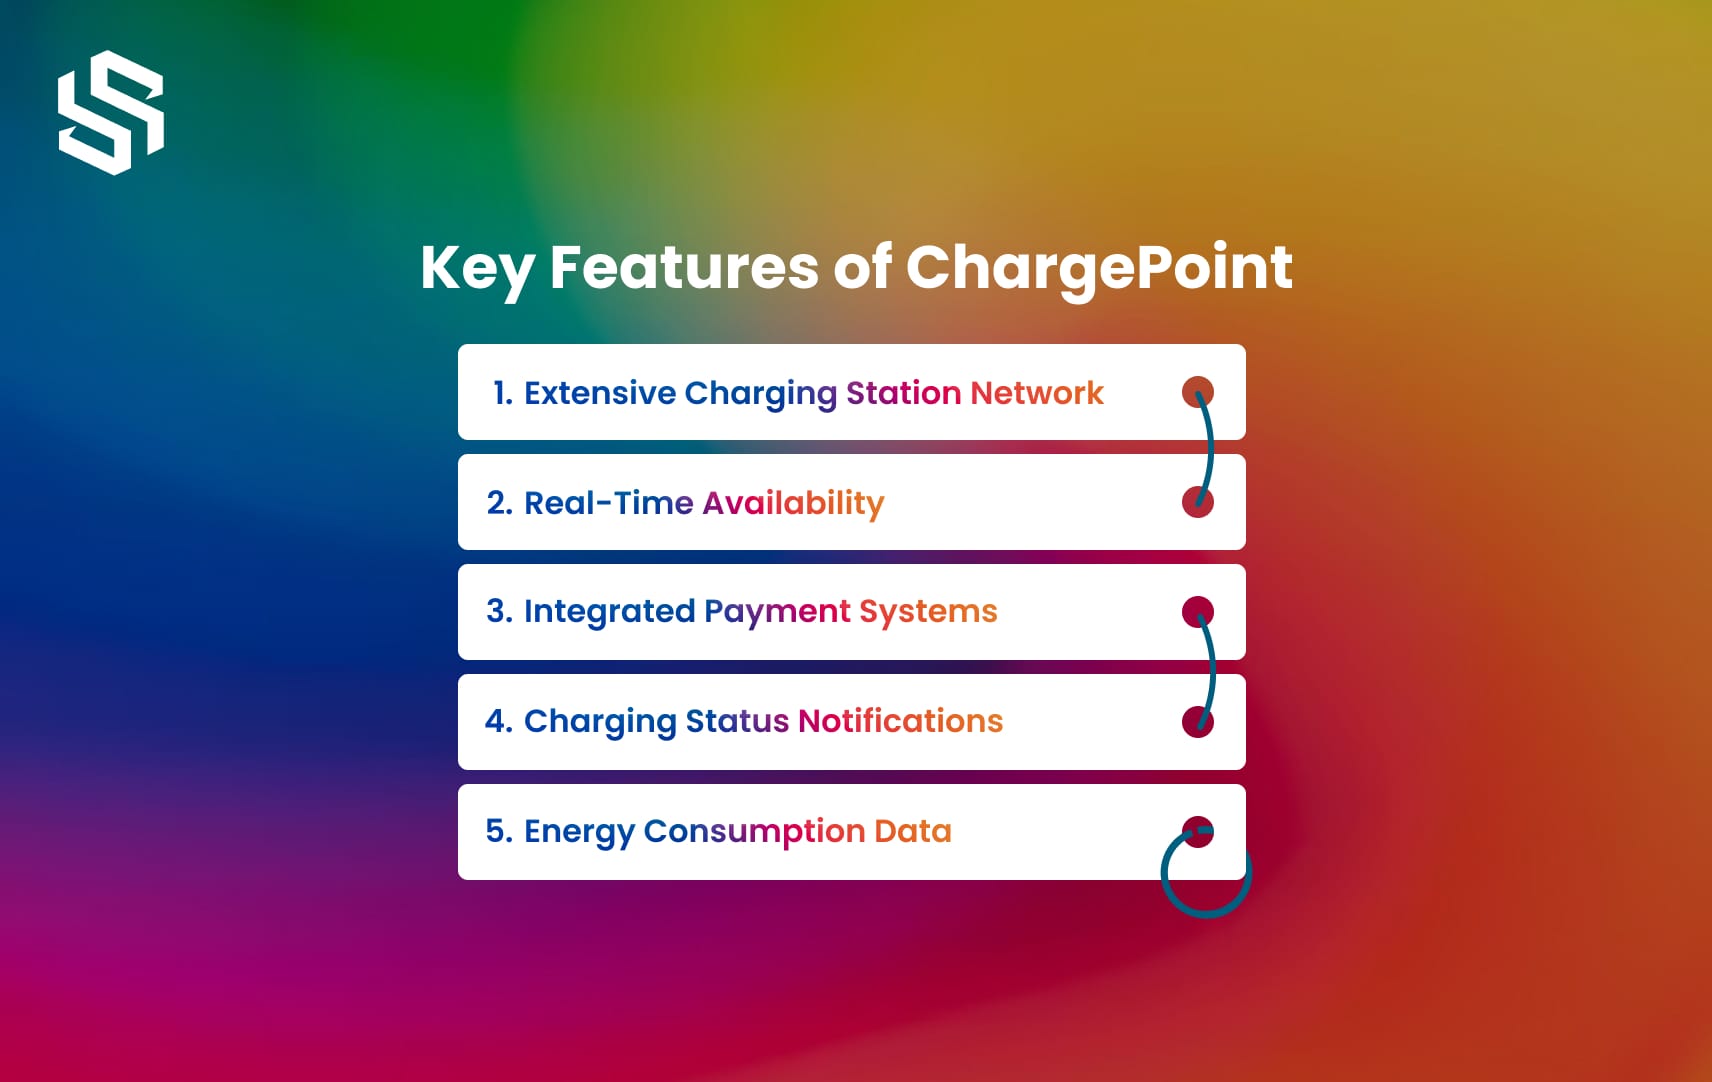 Key Features of ChargePoint